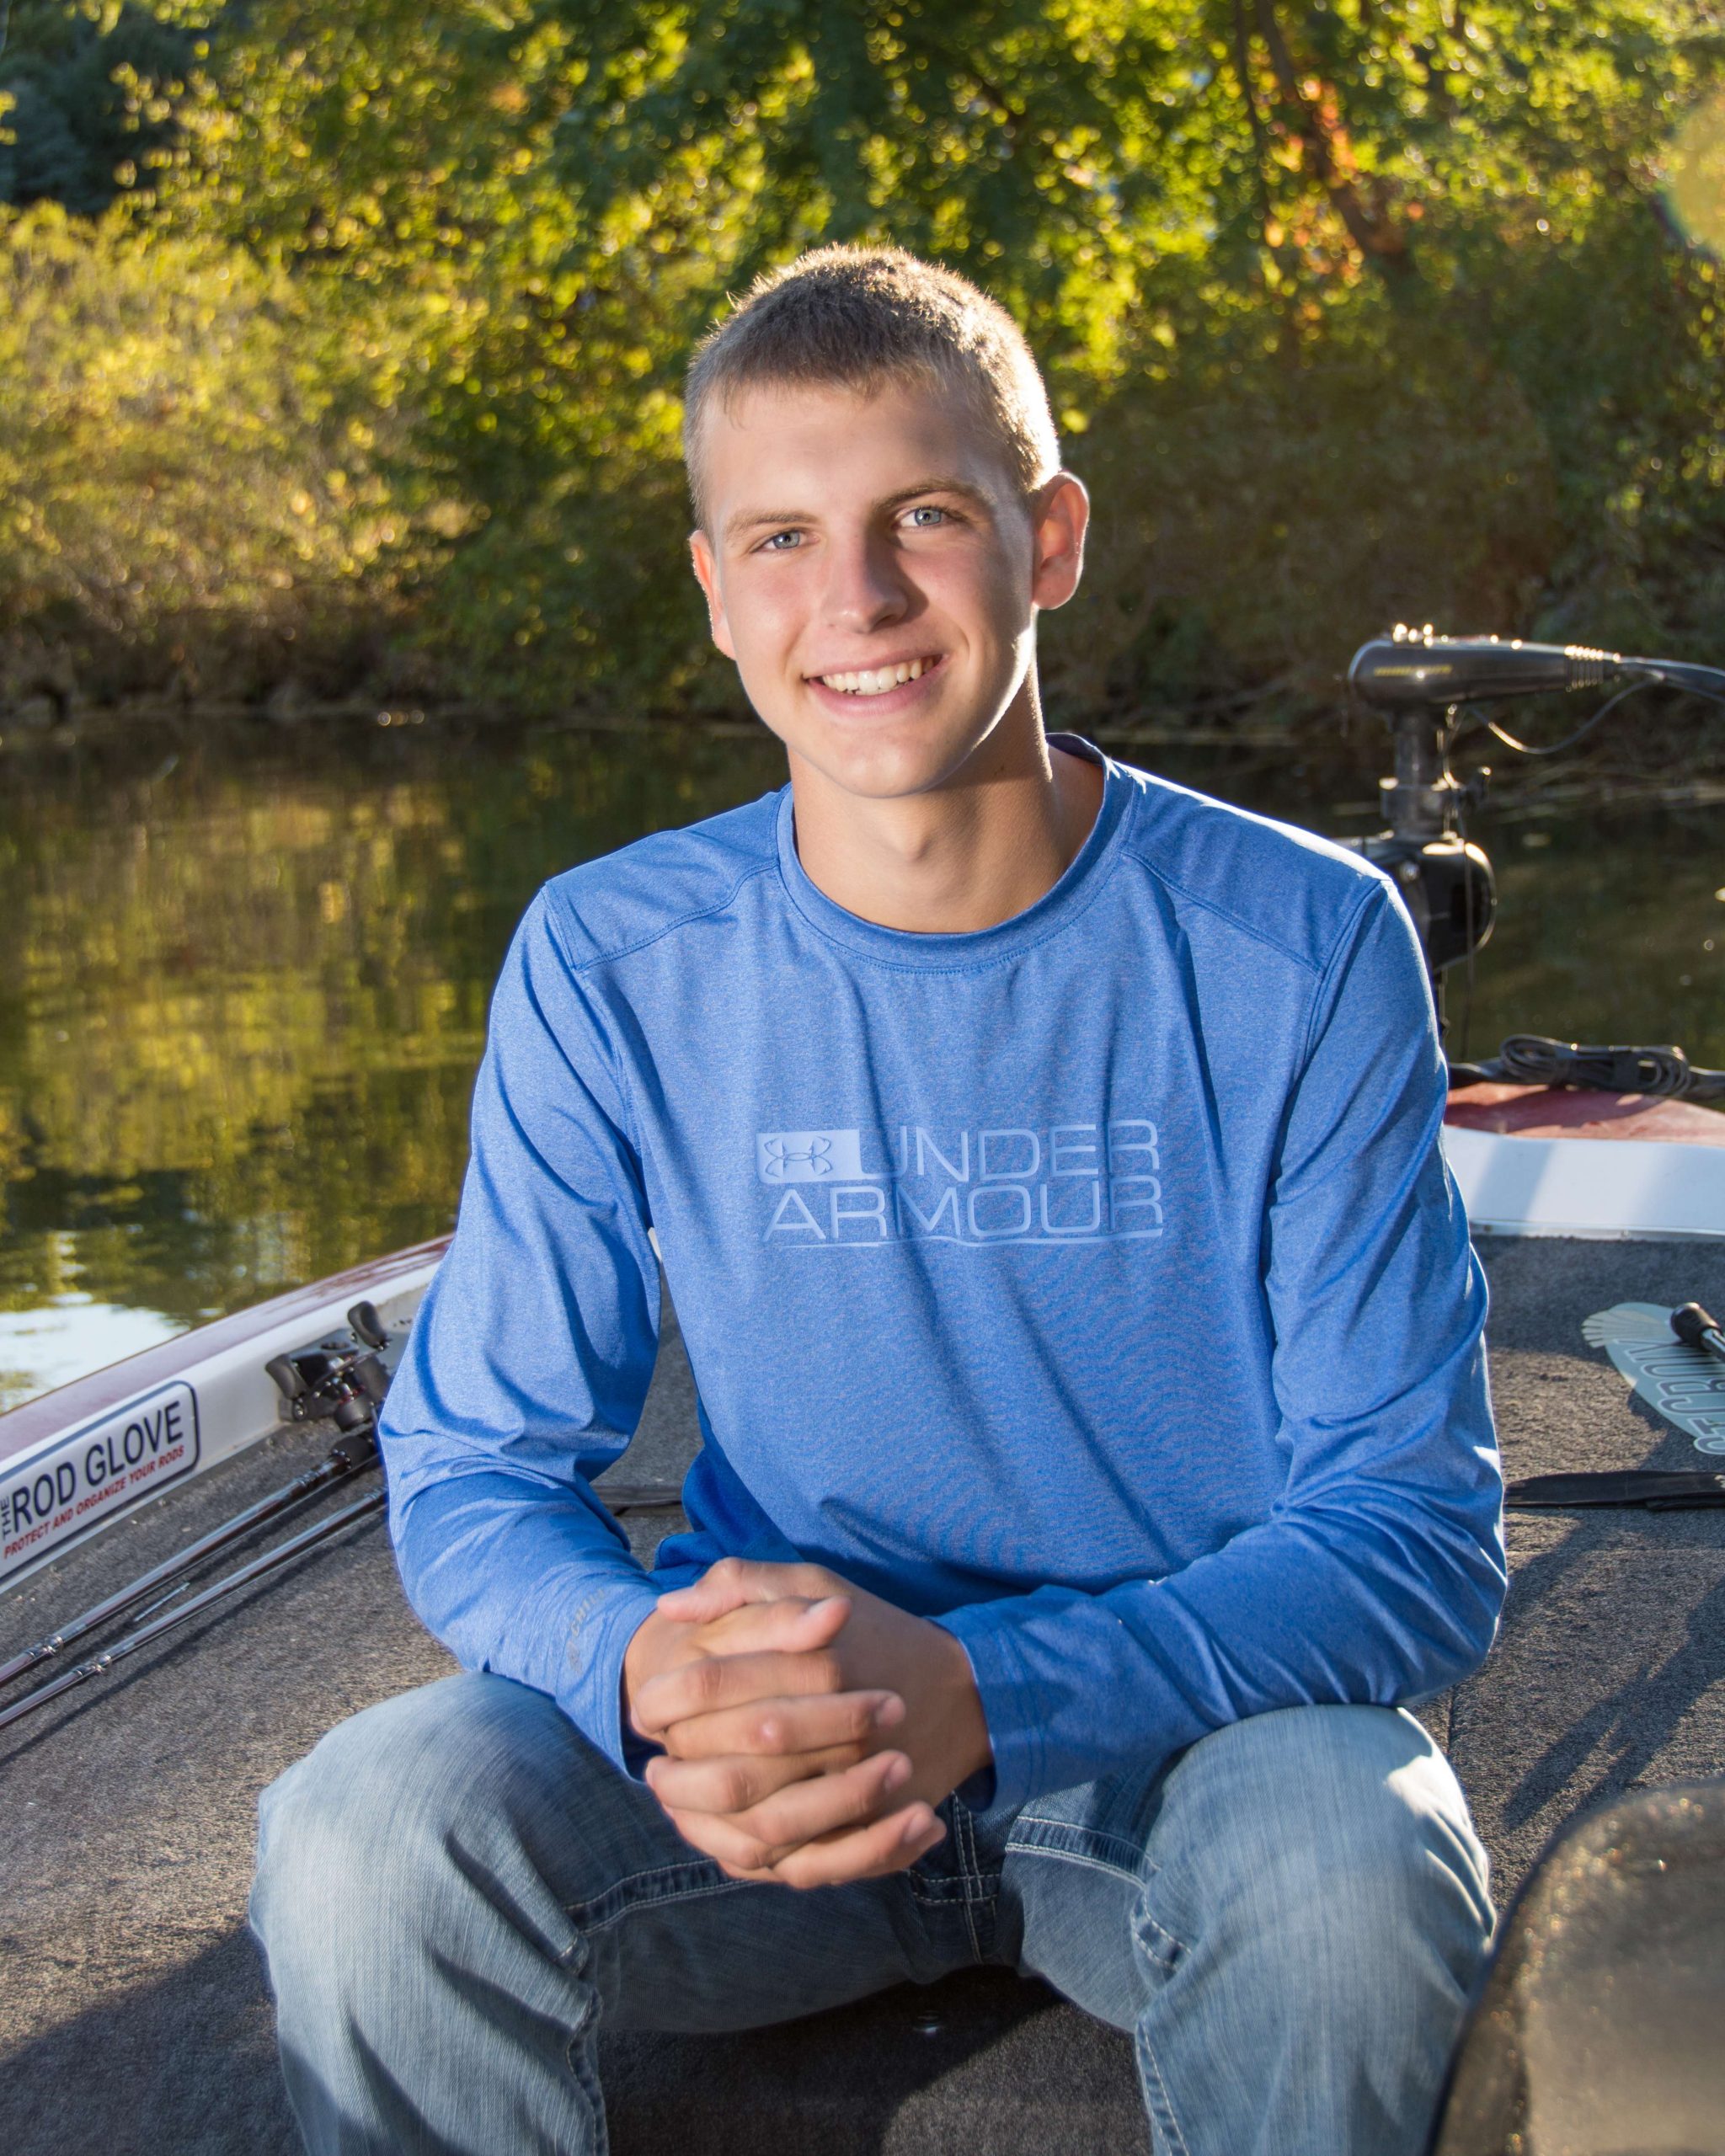 <b>Iowa: Clay Torson</b><br>
Torson is a senior from Cedar Rapids, Iowa, and has earned two first-place finishes in the past year. He was angler of the year for the Eastern Iowa High School Bassmasters last year and was voted in as president this year. At his clubâs last meeting, Torson brought in several rods, reels and baits to speak about what baits to use, when and how to use them.
